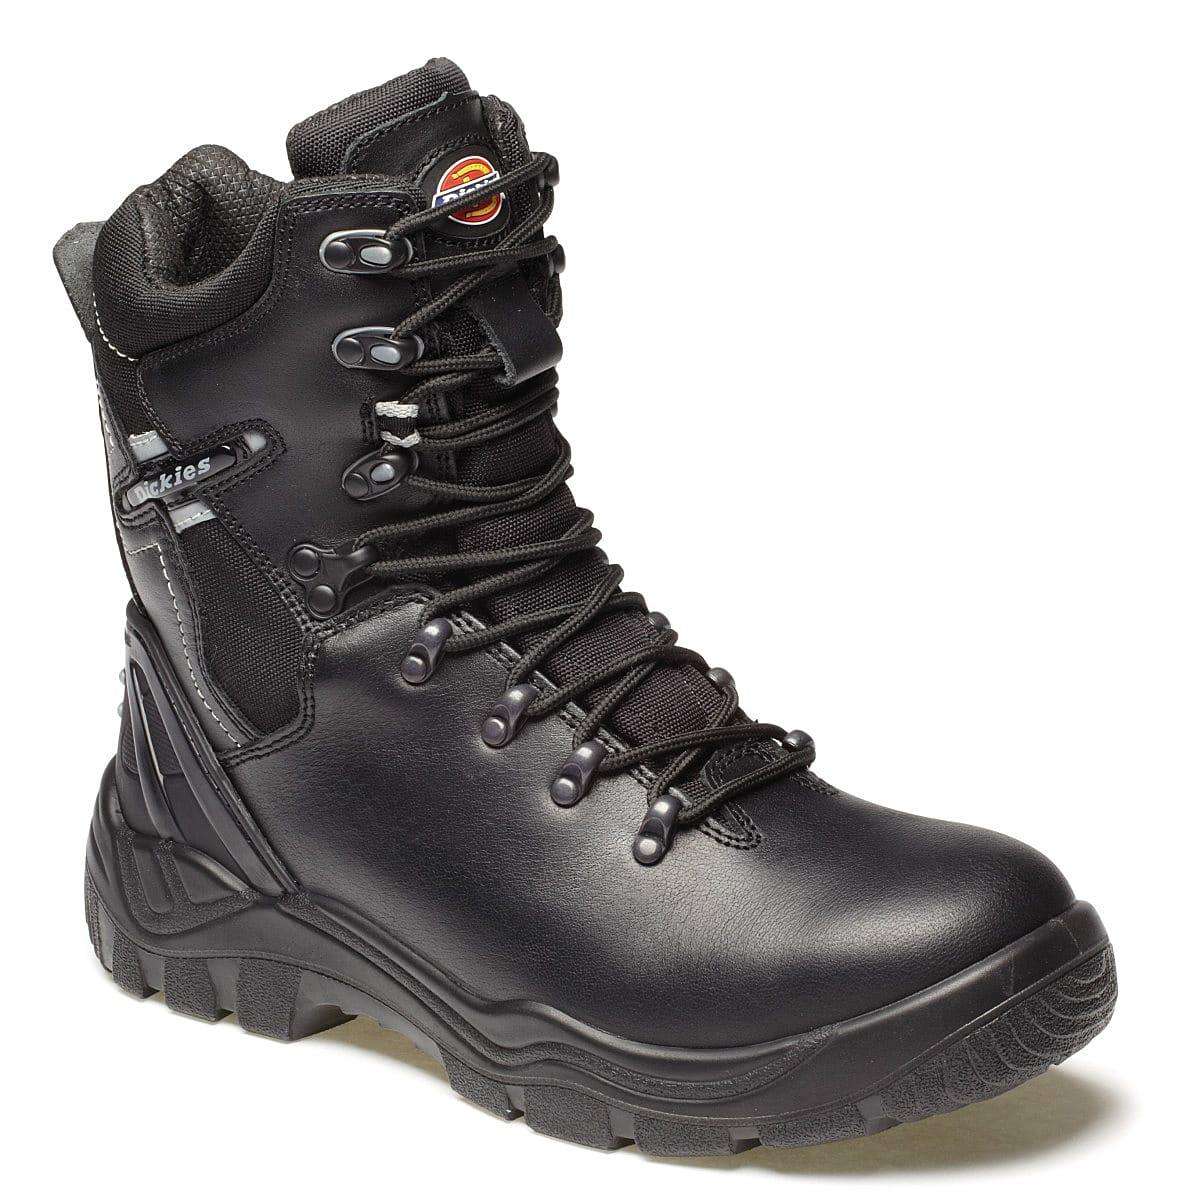 Dickies Quebec Super Safety Lined Boots in Black (Product Code: FD23375)